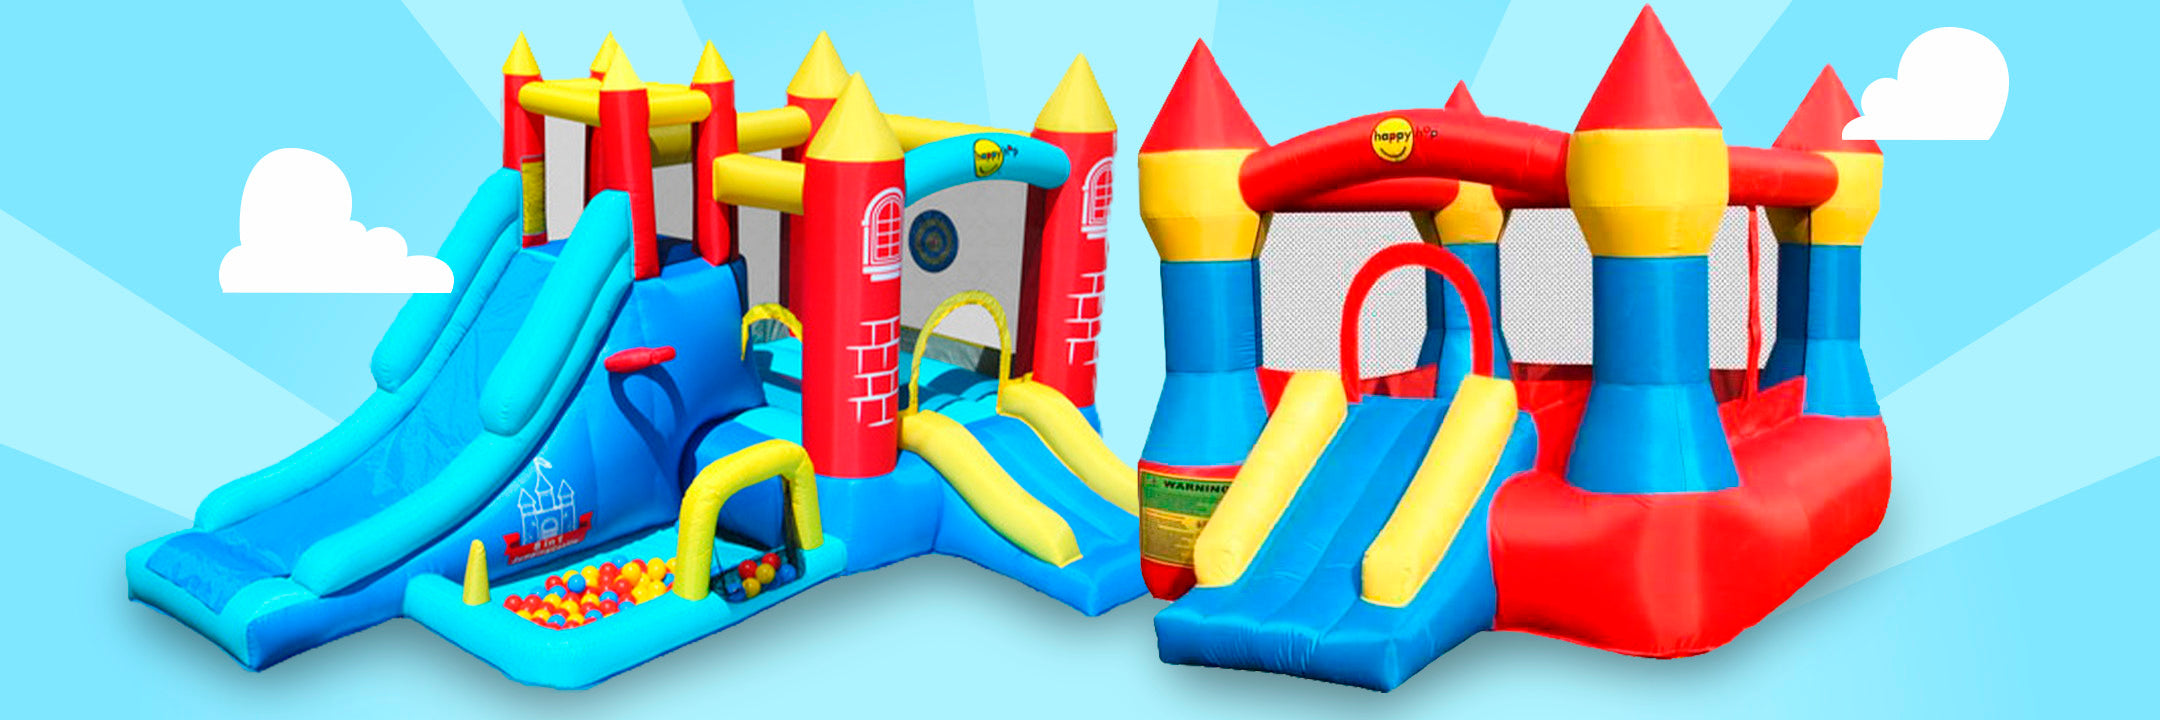 Bouncy Castles / Water Slides - DTI Direct Canada